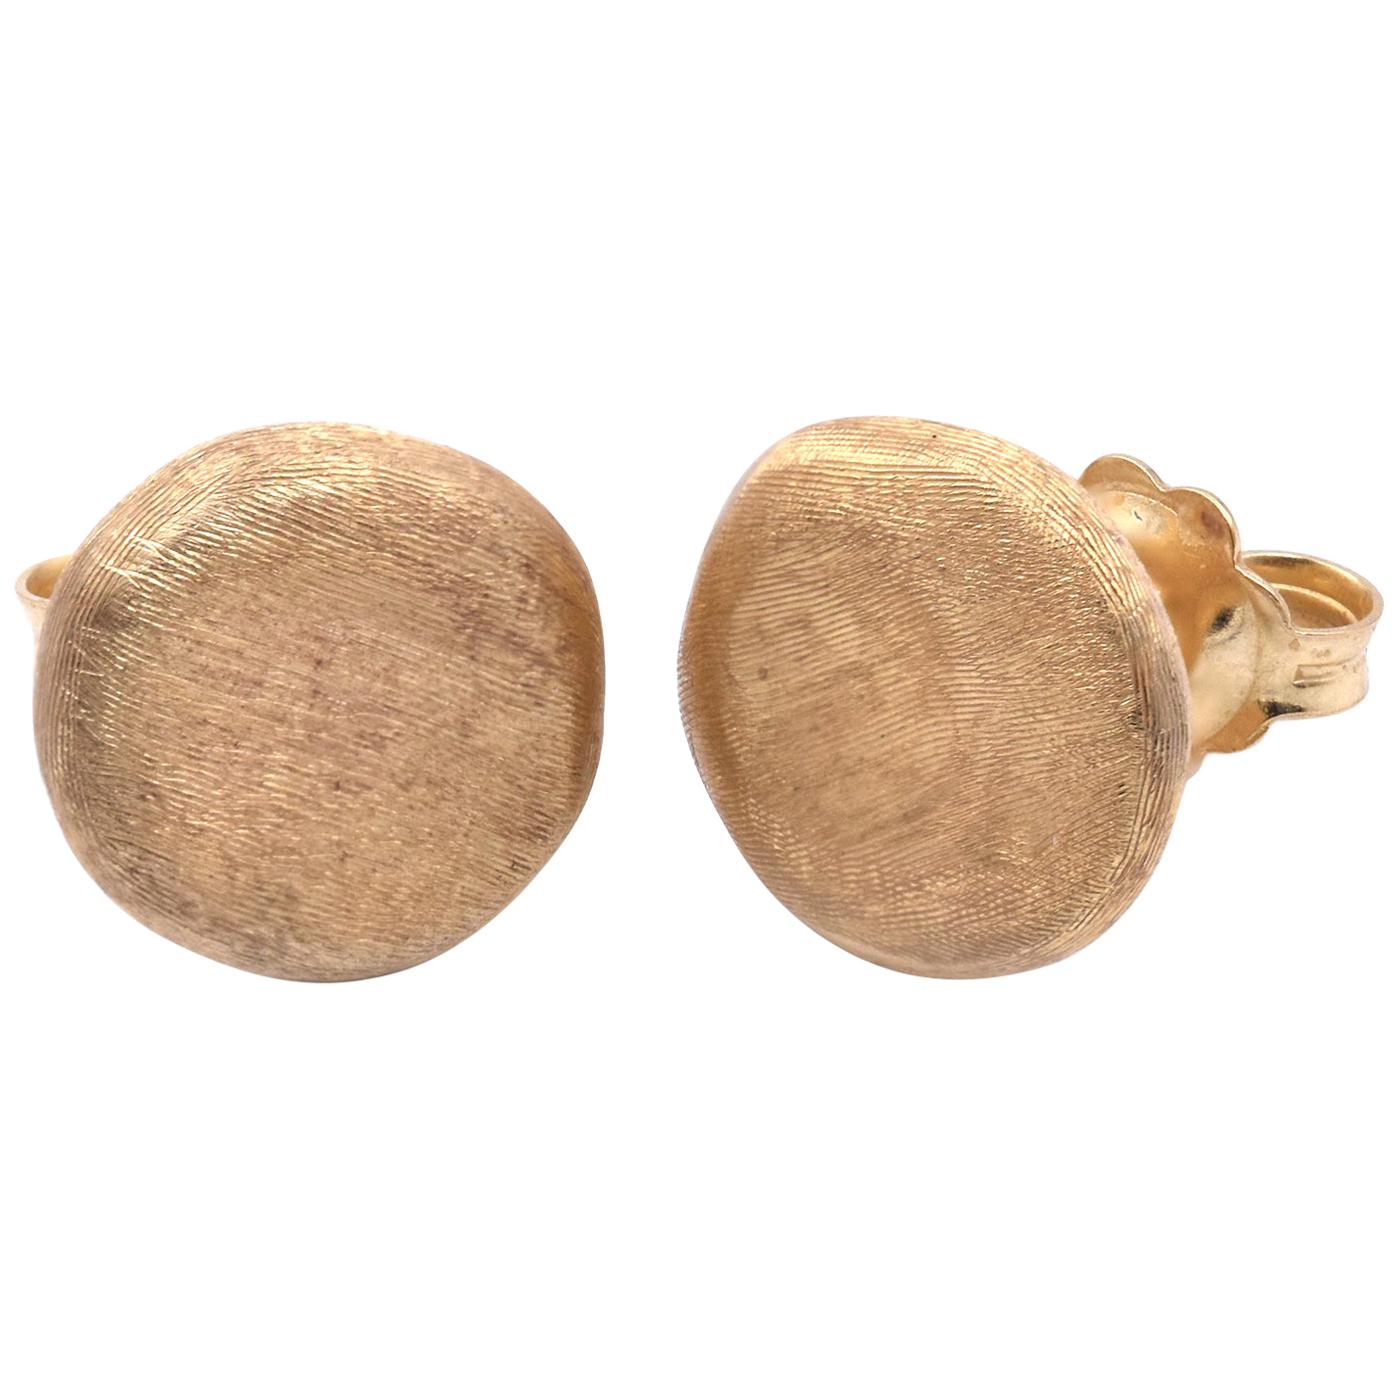 Marco Bicego “Africa” Textured Bean Stud Earrings